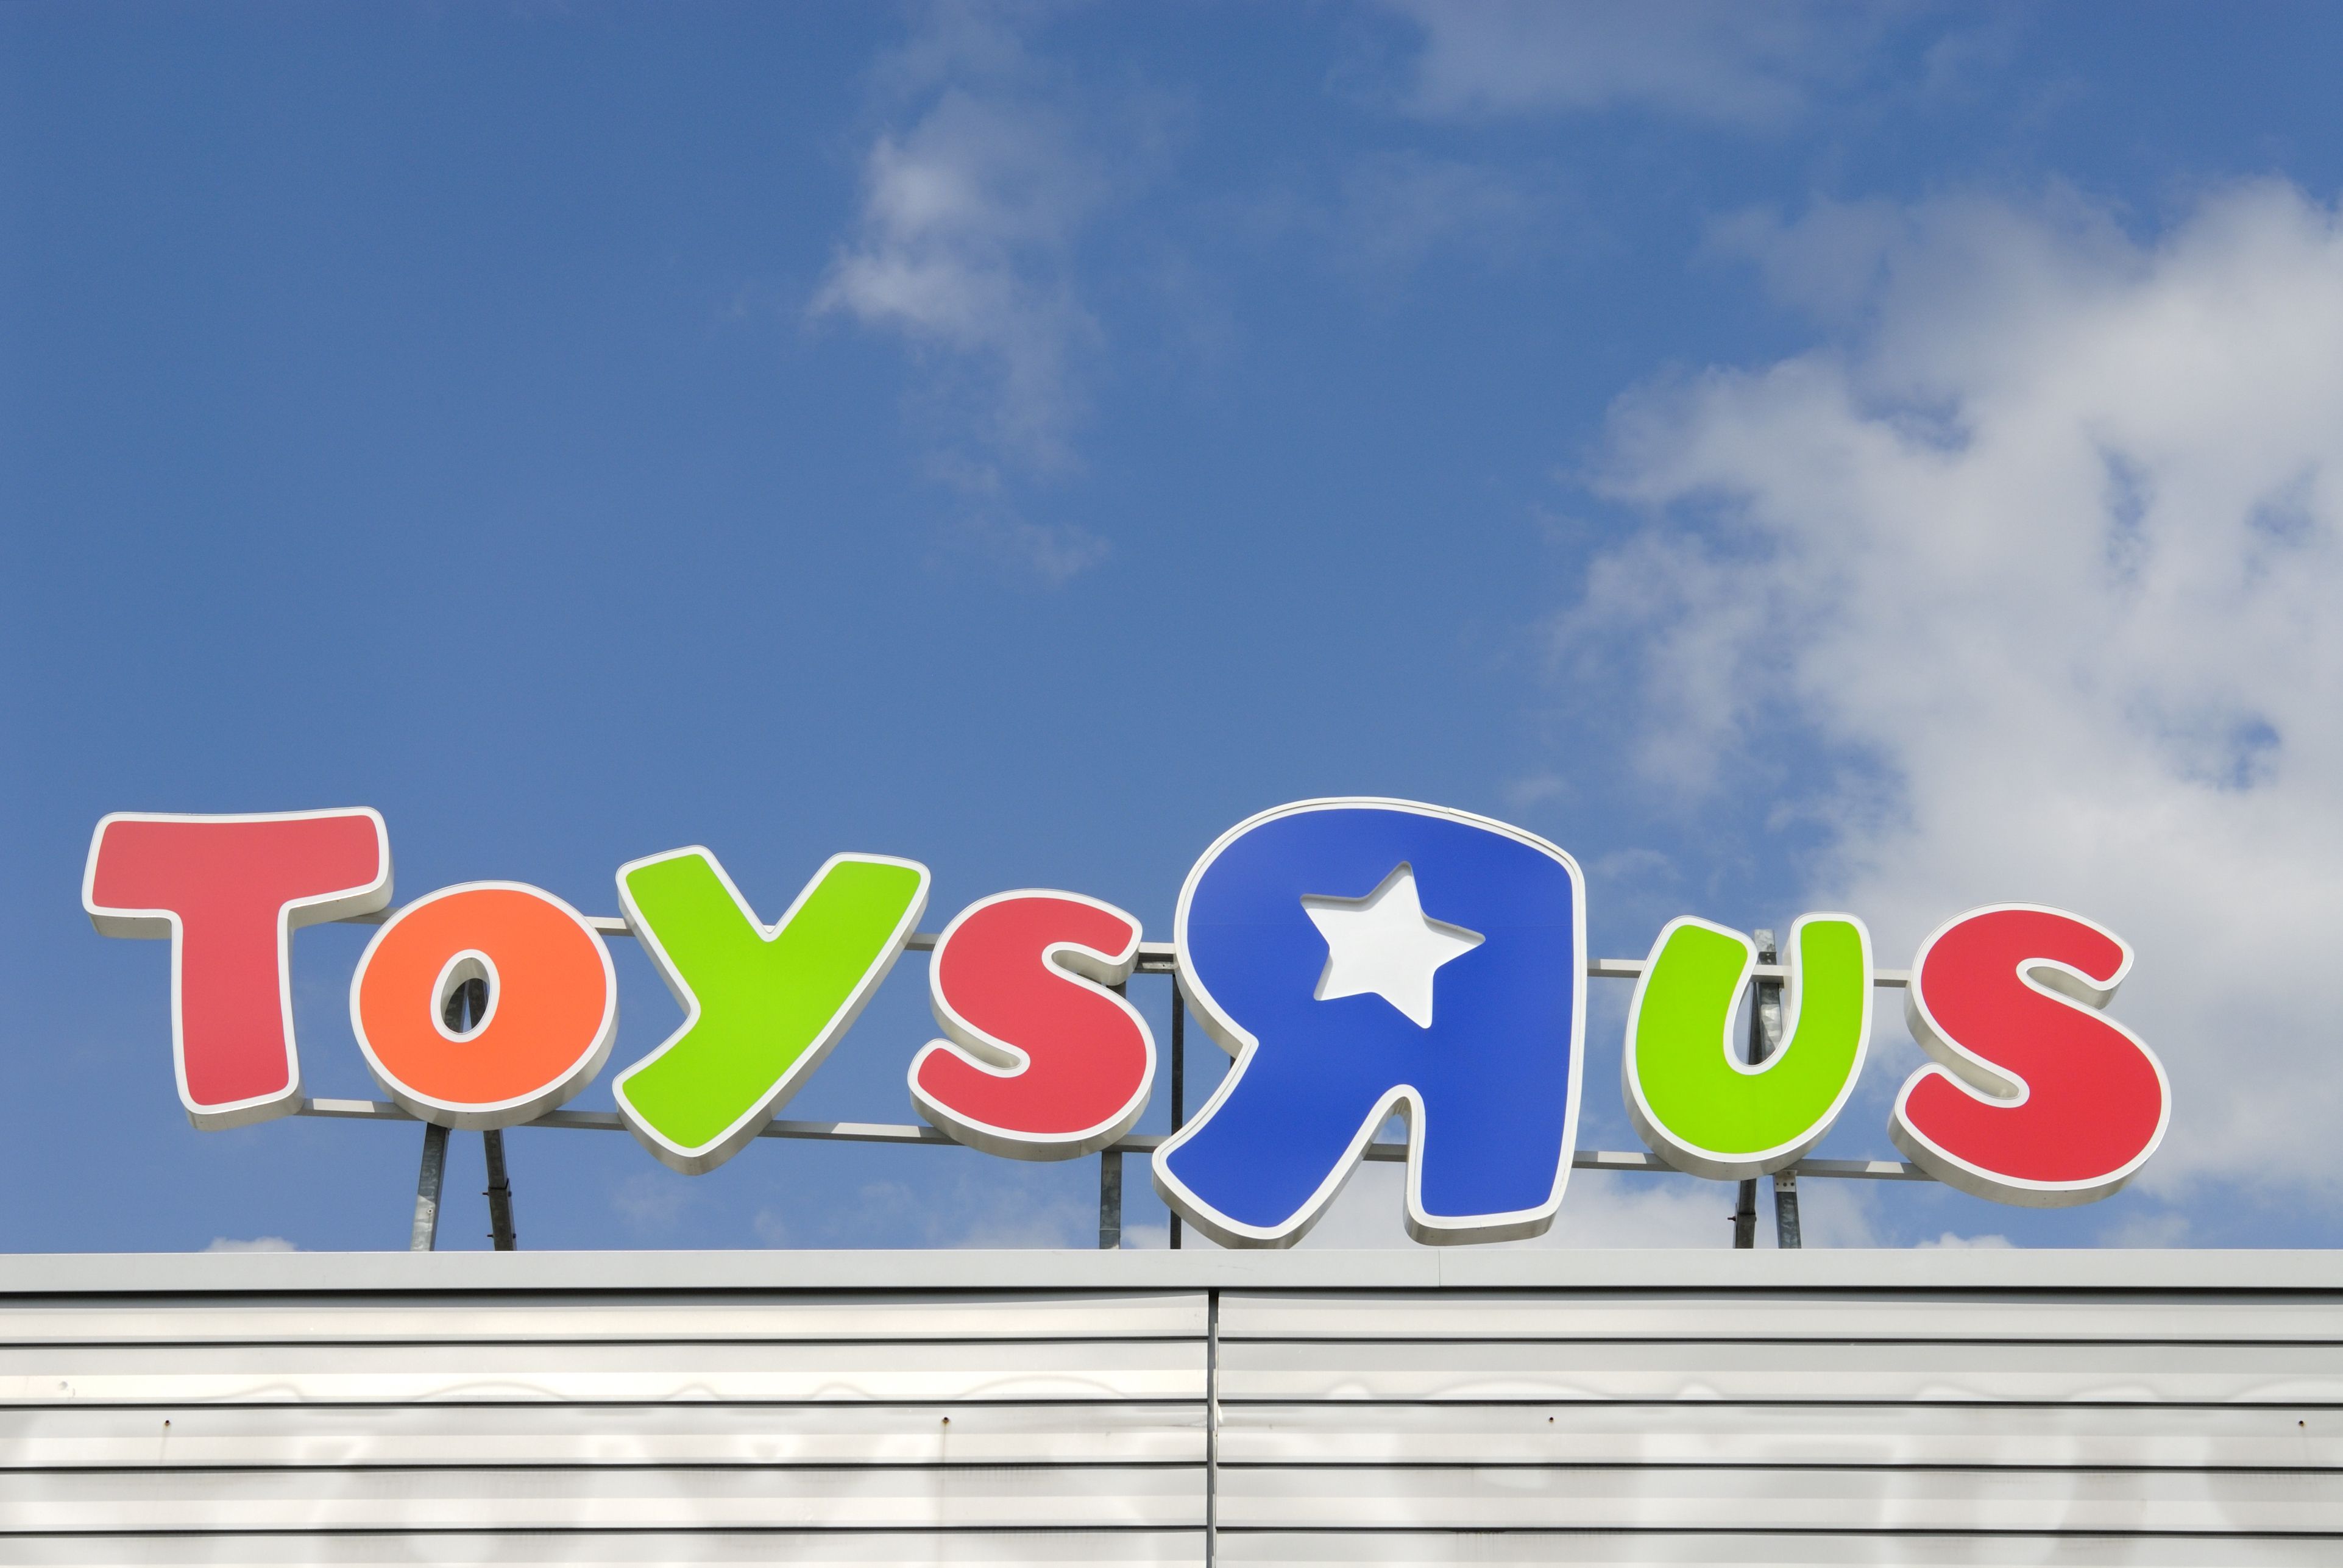 pop up toys r us stores